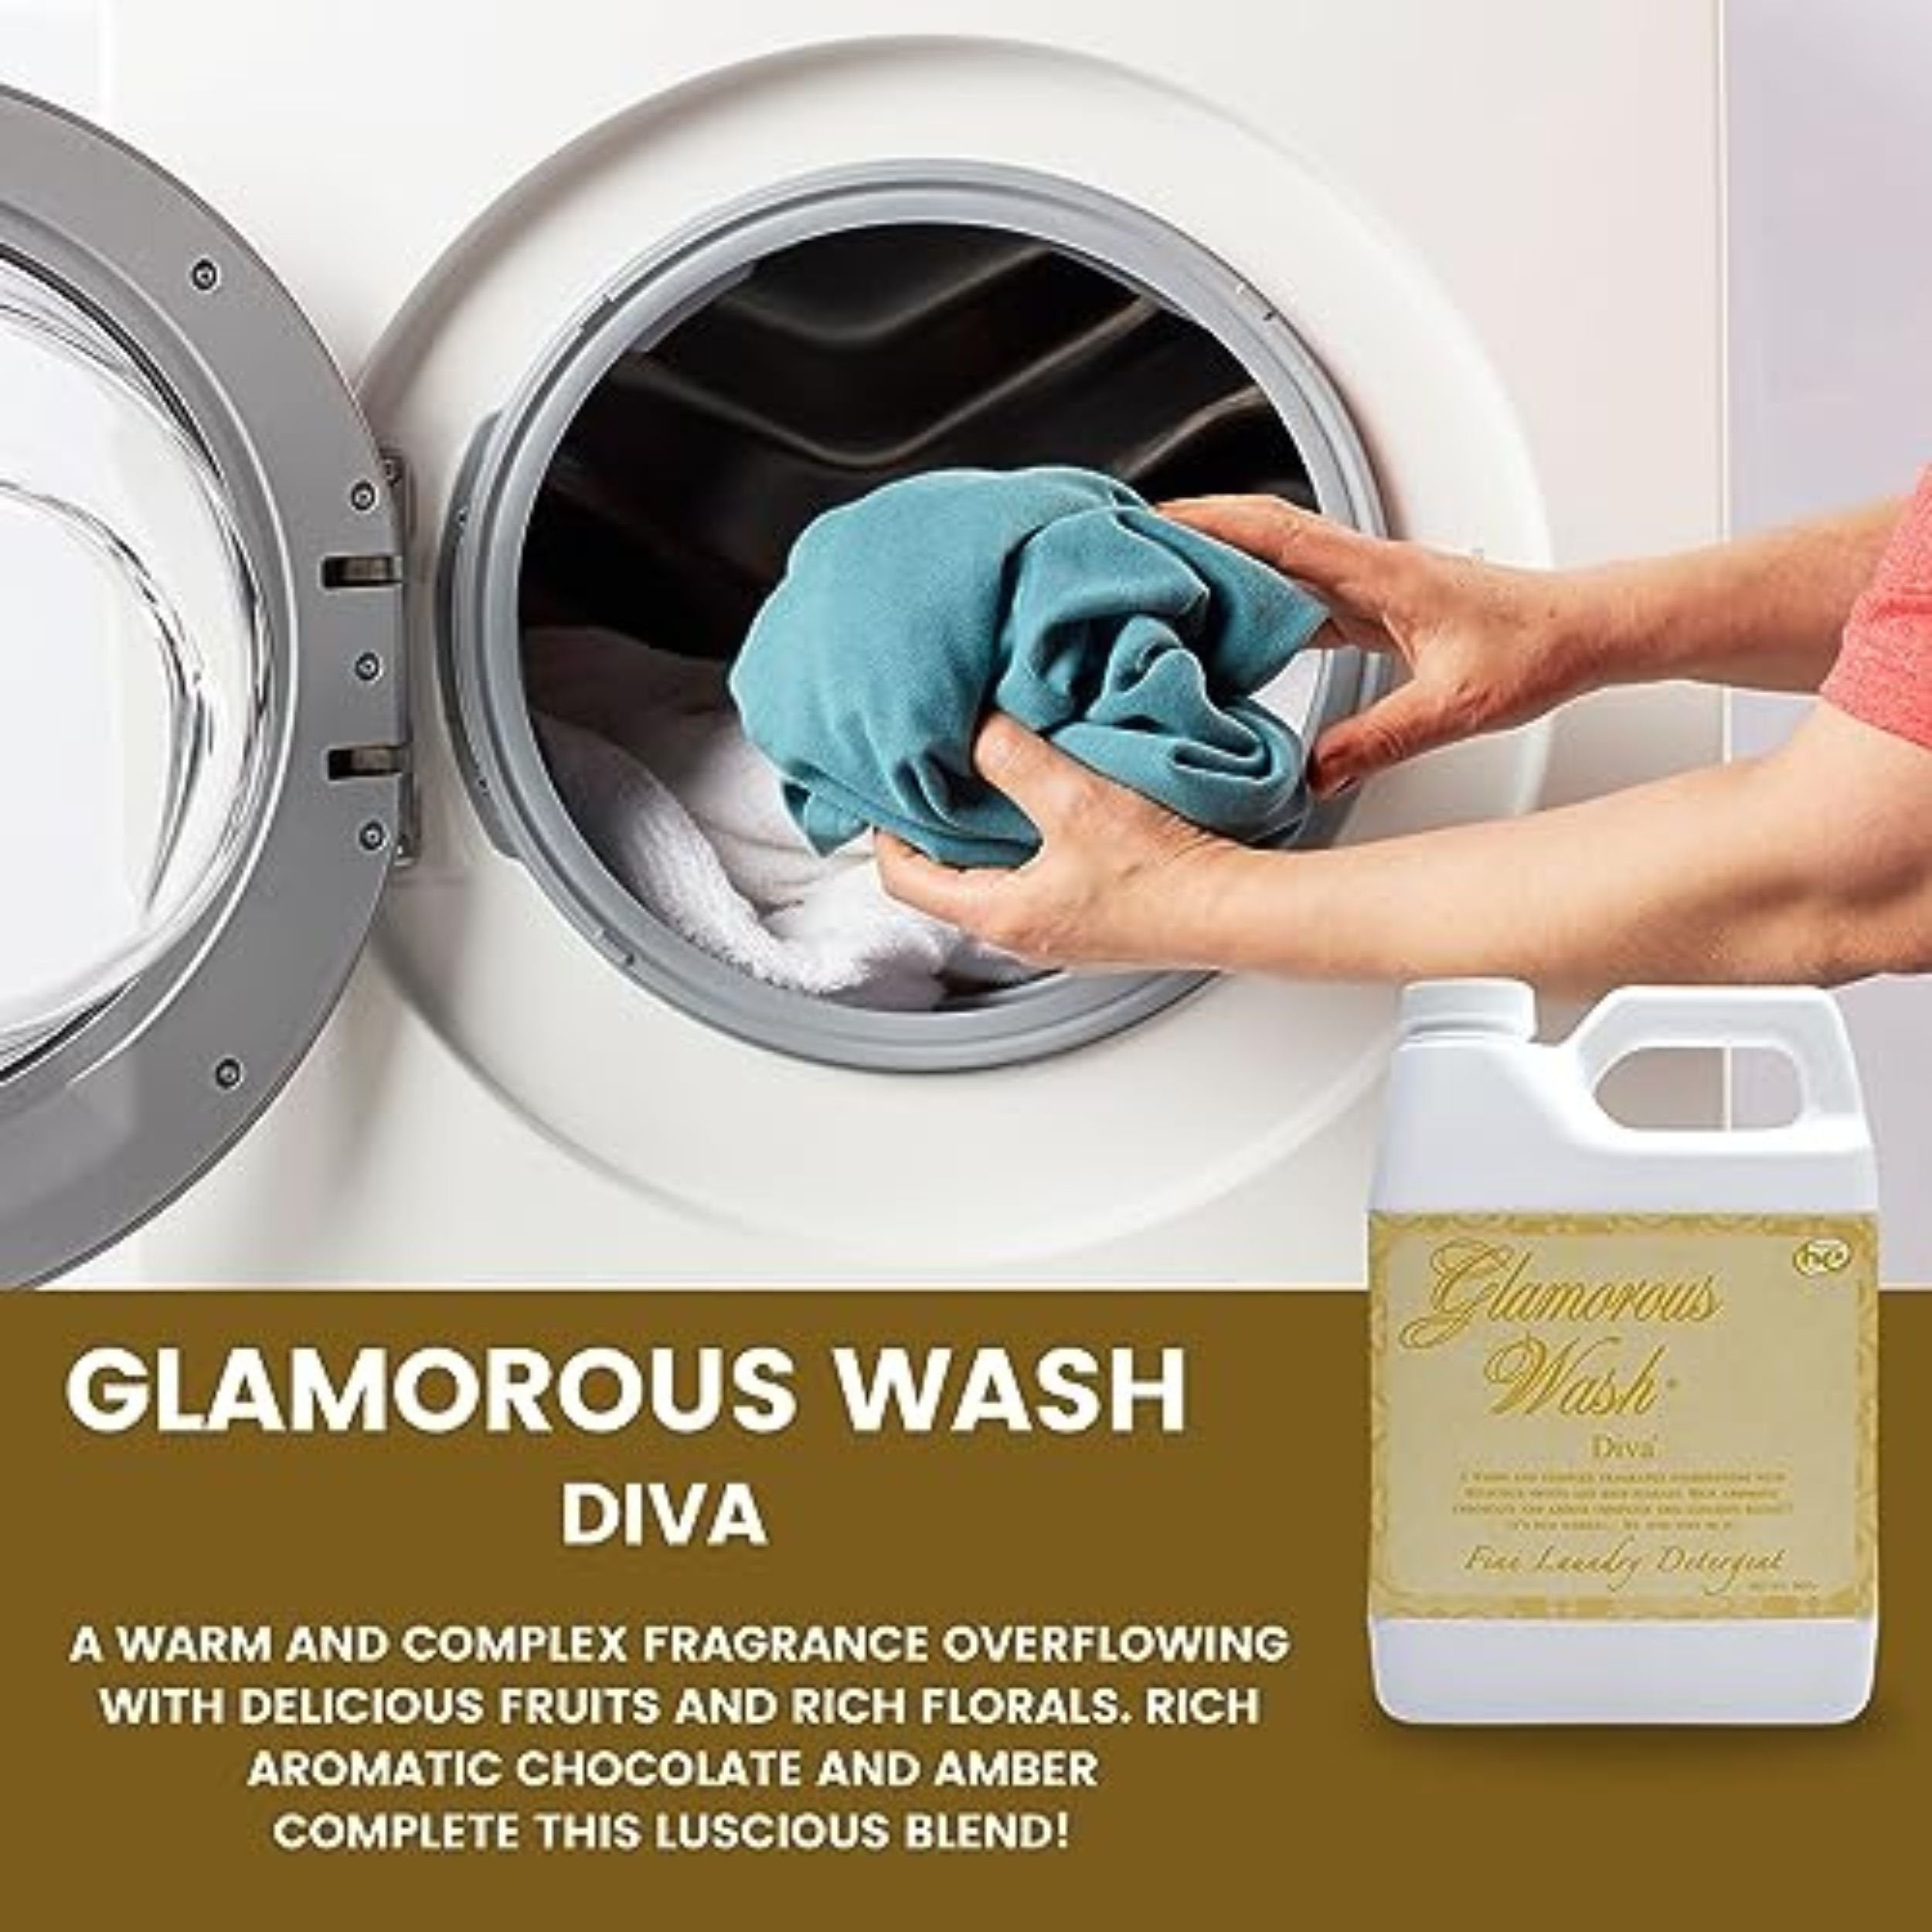 Tyler Candle Company Glamorous Wash Diva Fine Laundry Liquid Detergent - Hand and Machine Washable - 907g  (32 fl oz) - Pack of 1 with Multi-Purpose Keychain